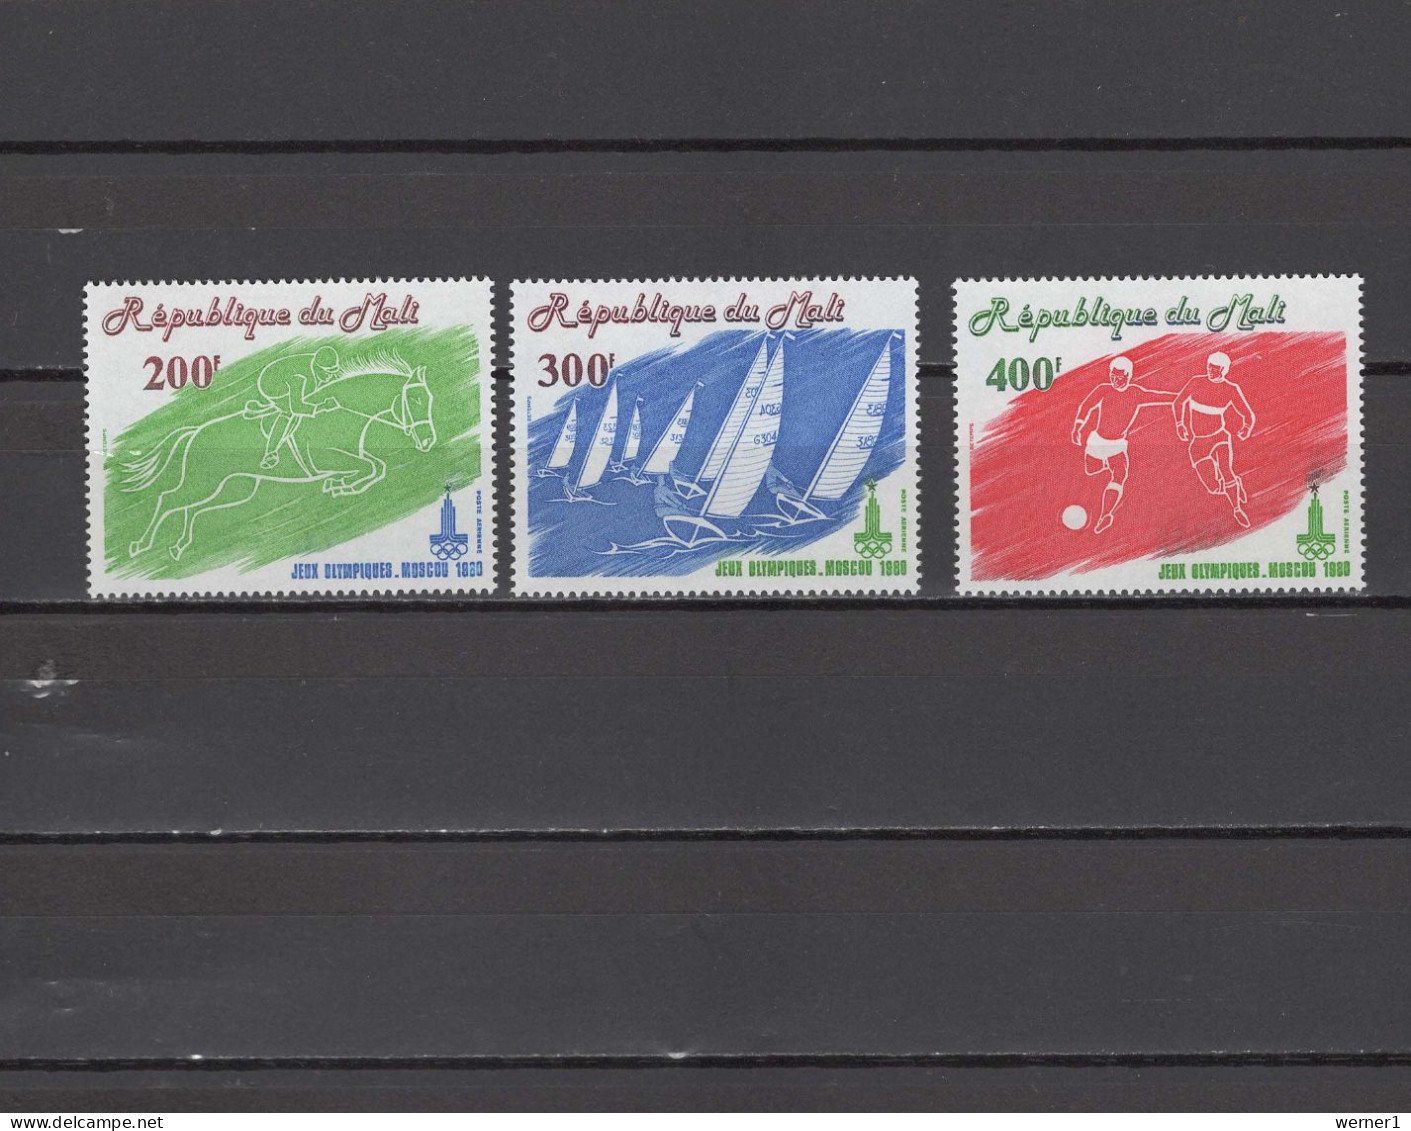 Mali 1980 Olympic Games Moscow, Equestrian, Sailing, Football Soccer Set Of 3 MNH - Verano 1980: Moscu